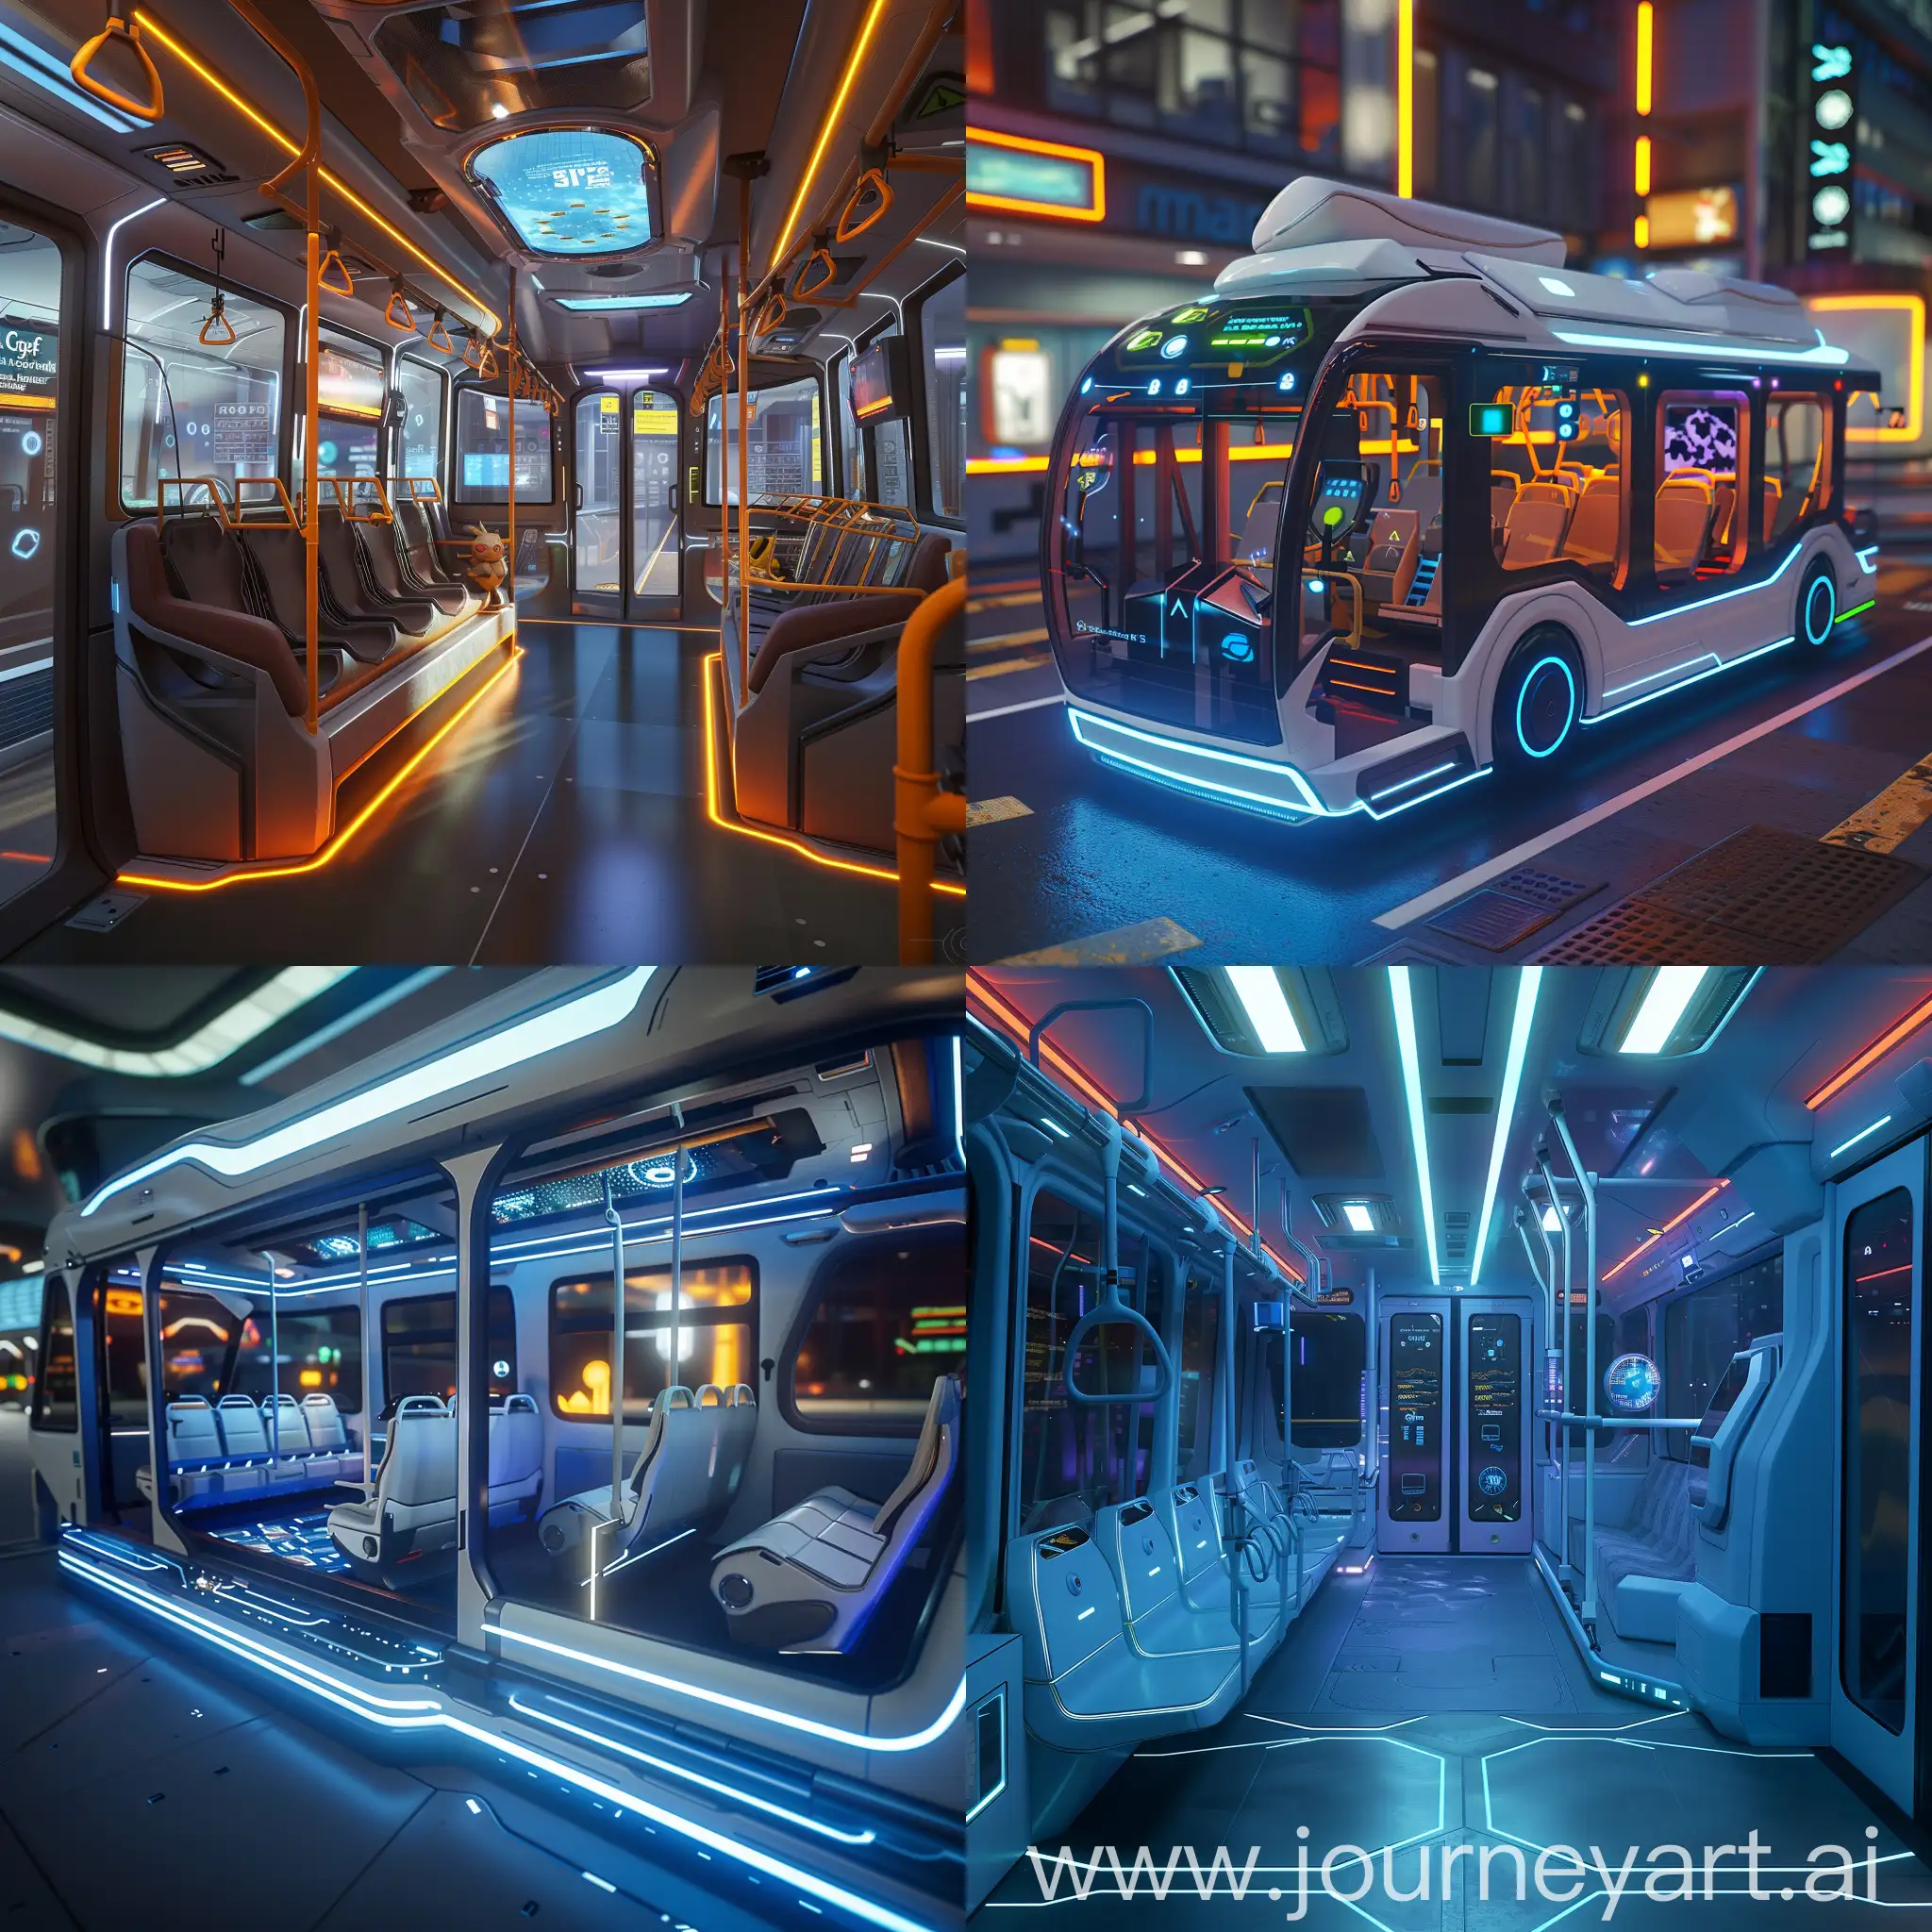 Futuristic bus, Holo-Stop Announcements (Halo), Augmented Reality Seats (Pokemon GO), Adaptive Climate Control Pods (No Man's Sky), Kinetic Charging Floors (Dance Dance Revolution), Smart Luggage Lockers (Tetris), Interactive Entertainment Walls (Portal), Biometric Security Doors (Mass Effect), On-Demand Food & Beverage Dispensers (Fallout), Hyperspeed Travel Simulators (Star Citizen), Community Hub Seating (Animal Crossing), Aerodynamic Streamlining (Cyberpunk 2077), Adaptive Chameleon Skin (Crysis), Interactive Light Displays (Tron), Projected Crosswalks (Grand Theft Auto), Retractable Landing Gear (Halo), Drone Delivery Ports (Death Stranding), Interactive Destination Holograms (Overwatch), Kinetic Energy Harvesting Panels (Mirror's Edge), Smart Window Tinting (Mass Effect), Modular Expansion Pods (No Man's Sky), unreal engine 5 --stylize 1000